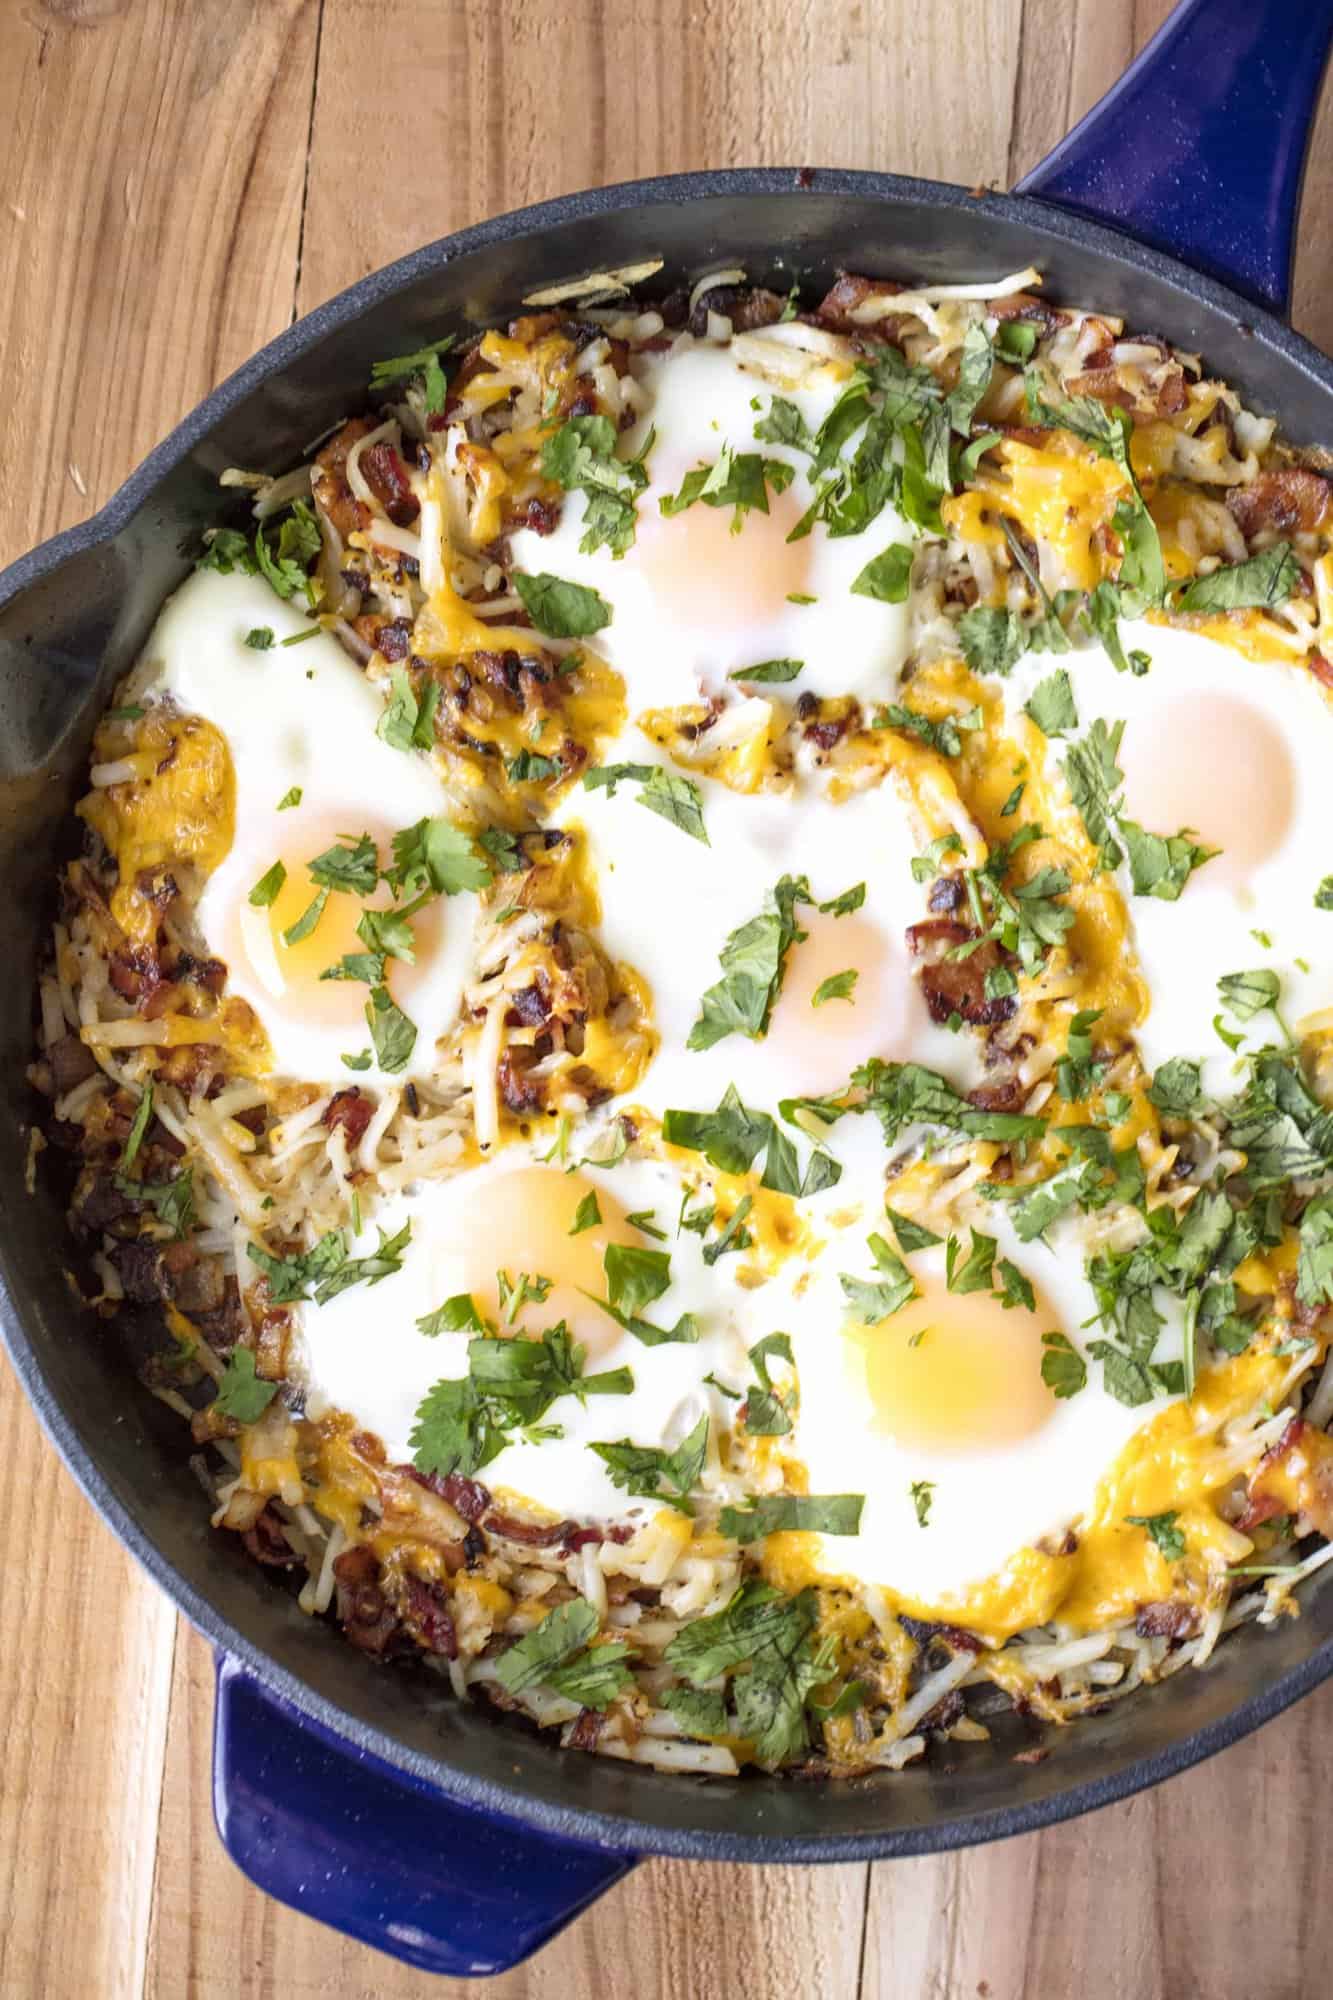 Everything you love about breakfast in one easy skillet dish. Sheepherder's Breakfast is simple and delicious, filled with hash browns, bacon, and eggs.